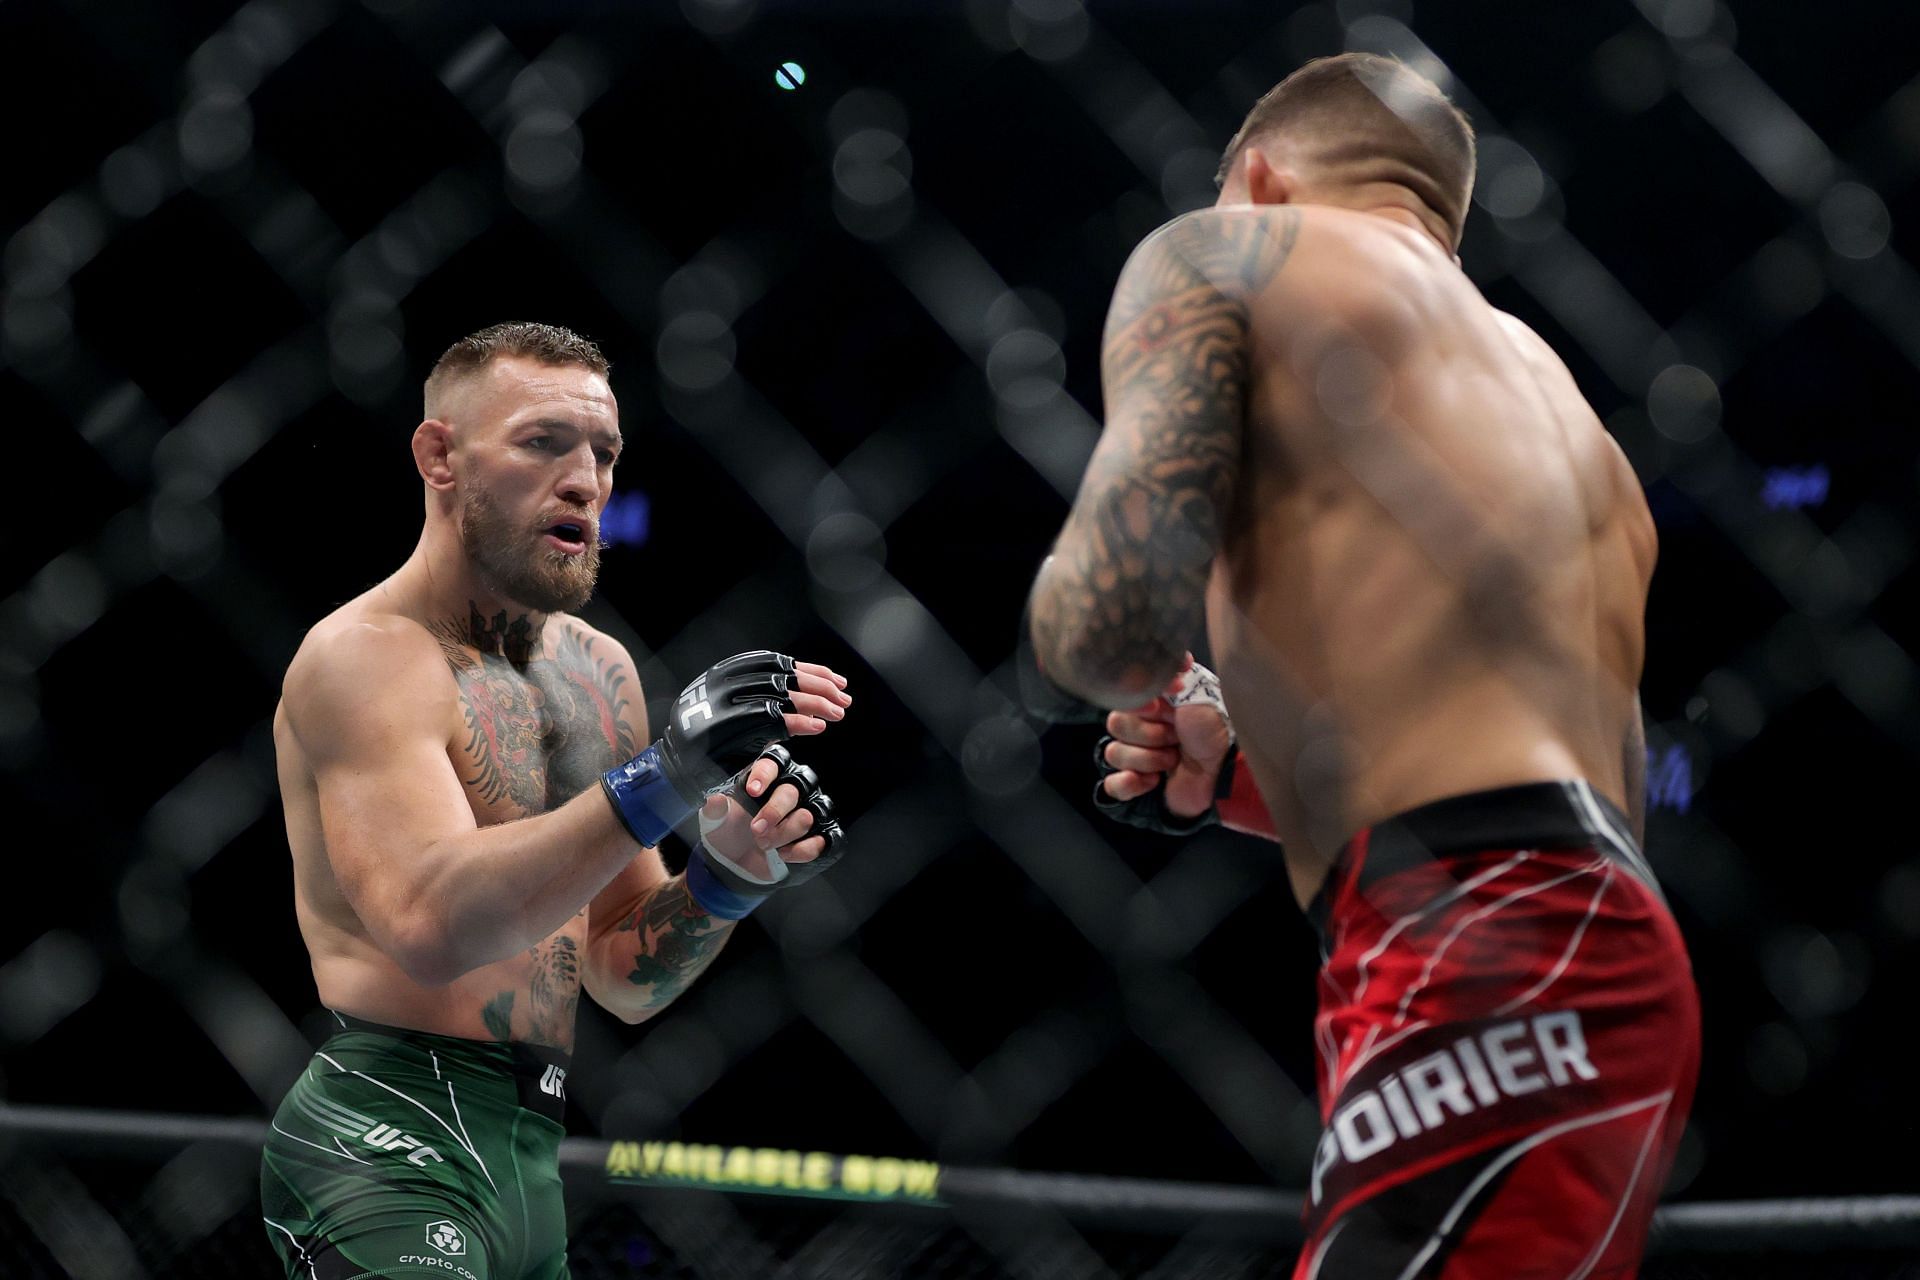 Poirier defeated McGregor in front of 20,062 fans